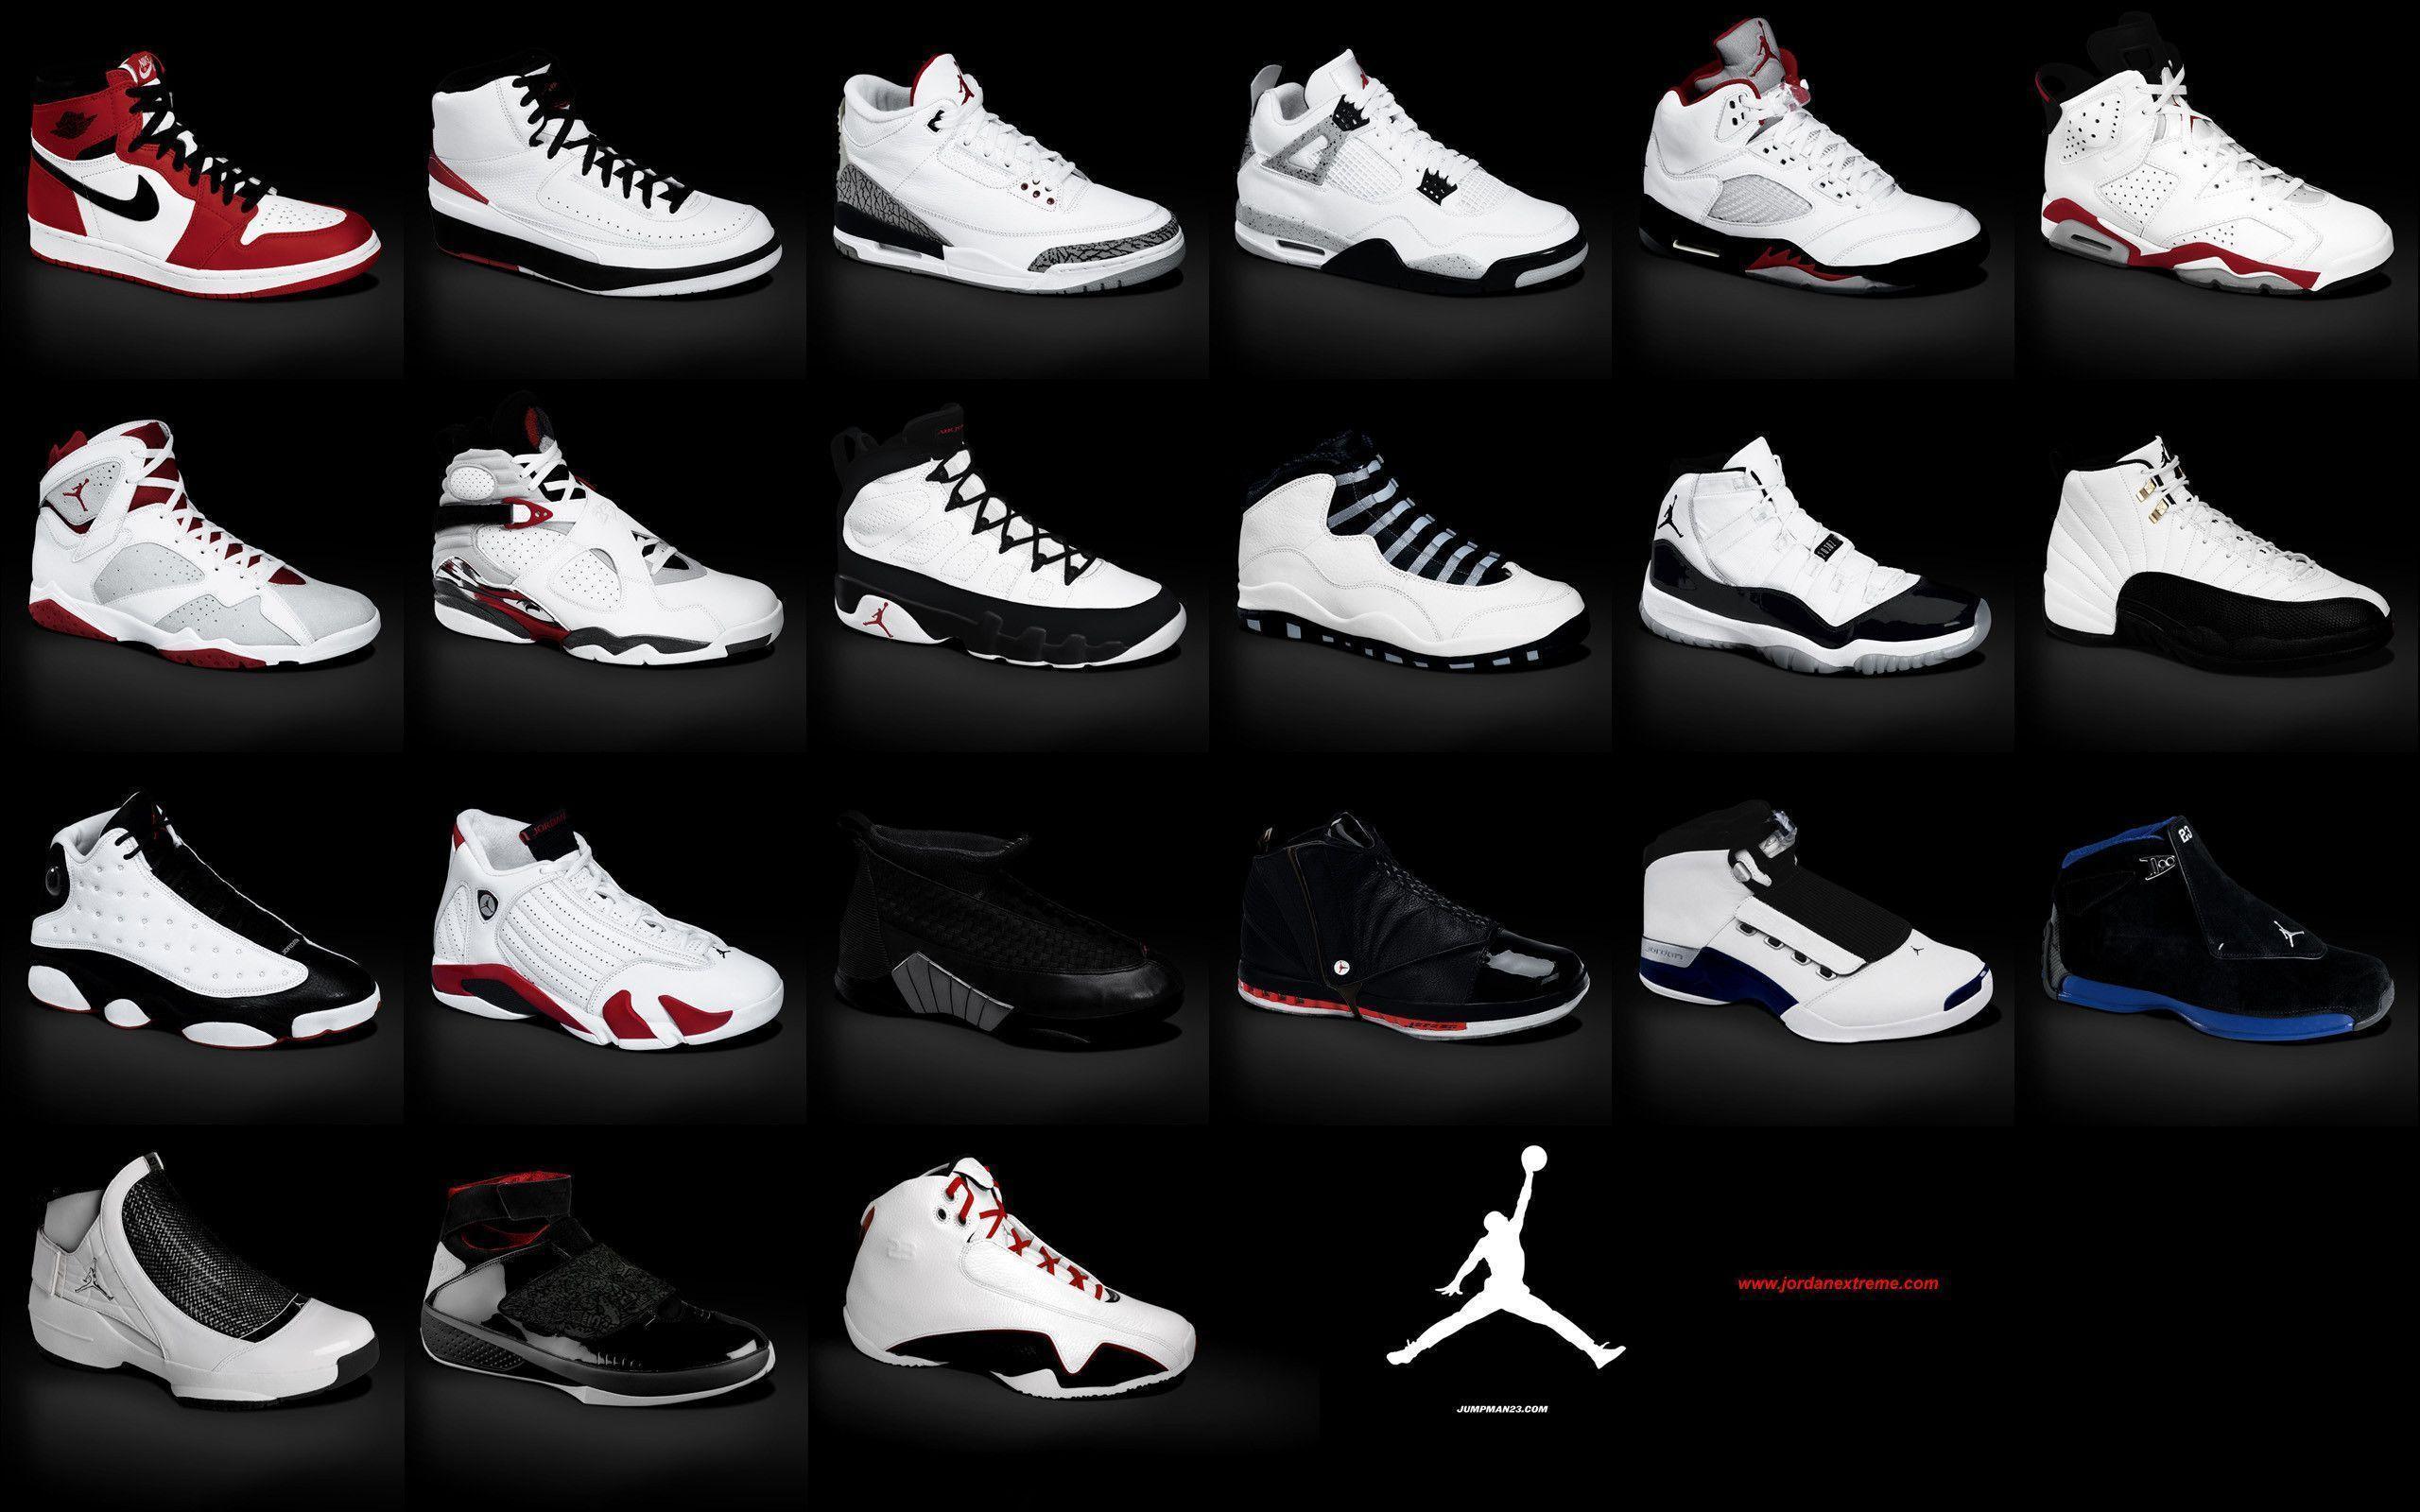 Terrific All Nike Shoes Ever Made List Wallpaper HD 1280x800PX